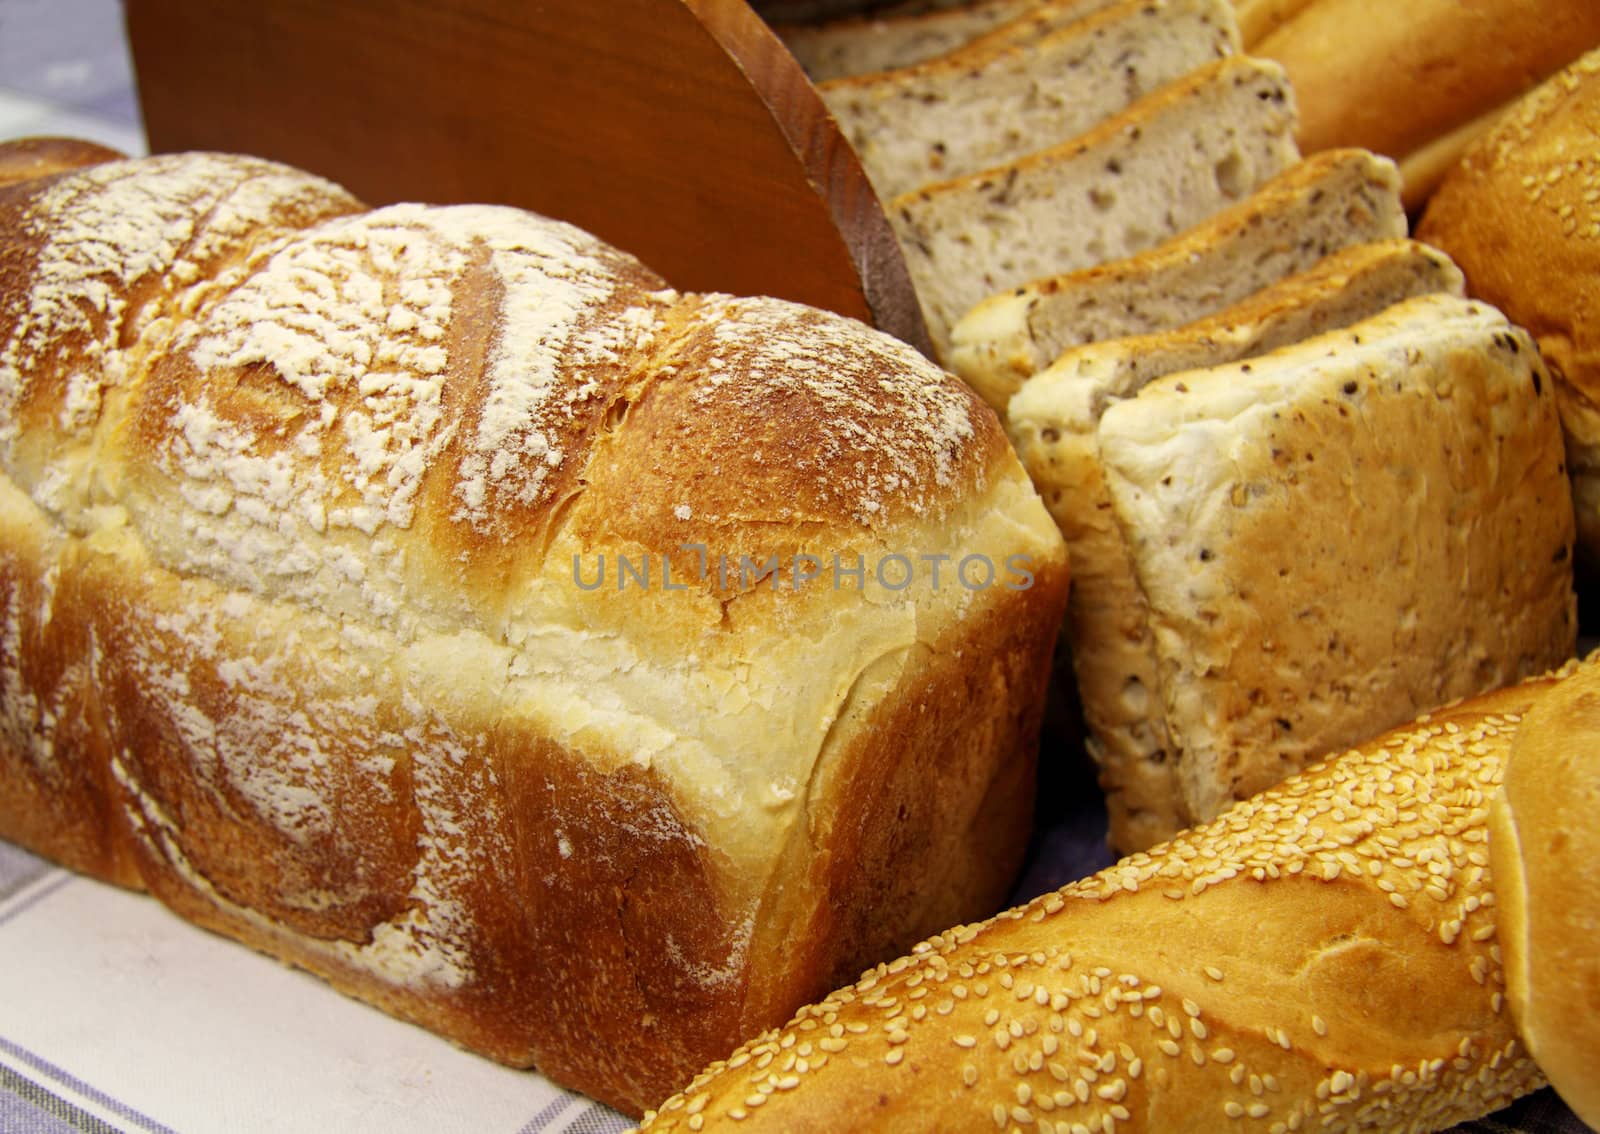 Selection of different types of rolls, loaves and bread.